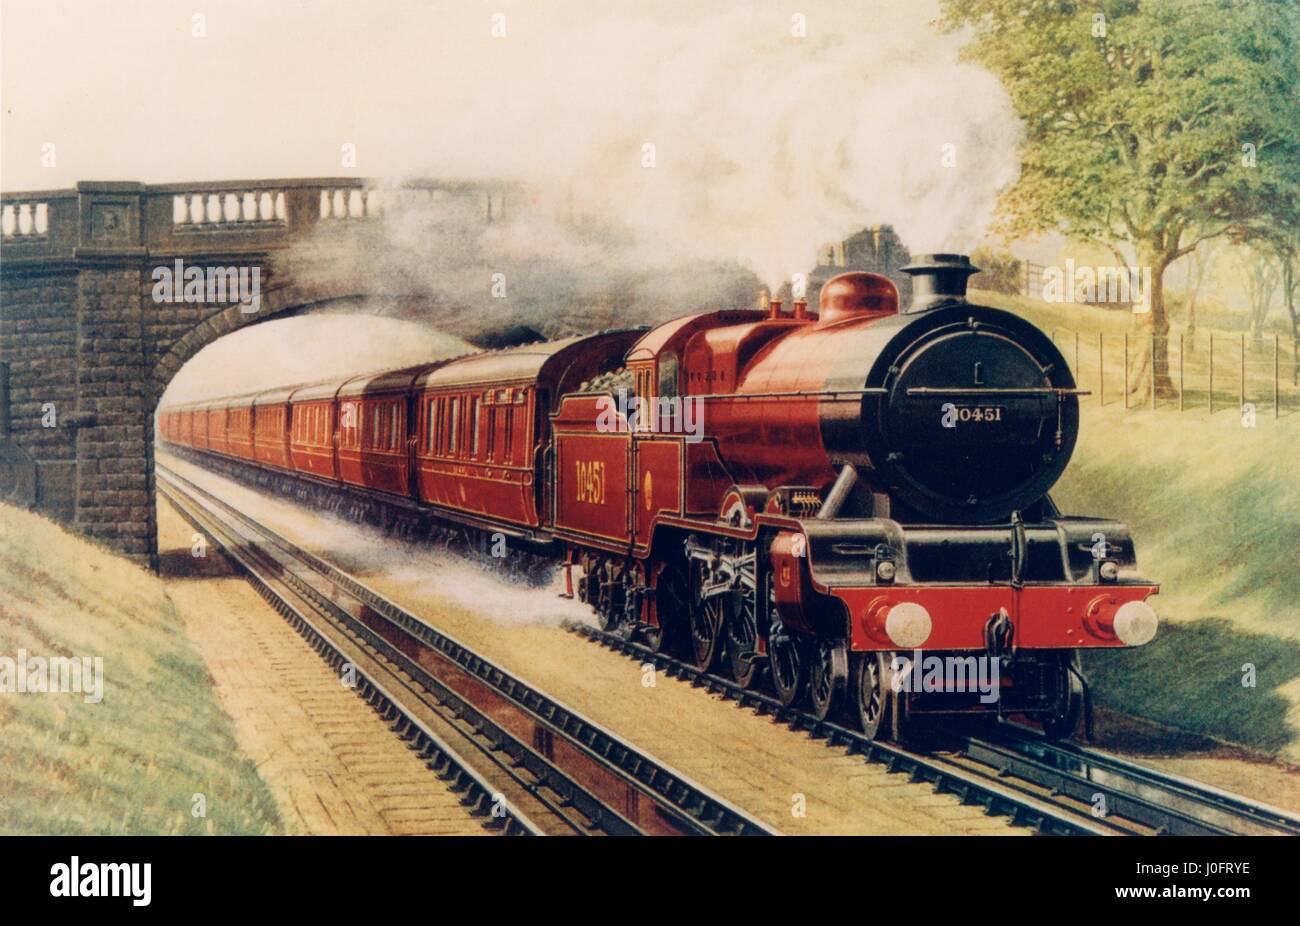 London, Midland and Scottish Railway (LMS) Scotch Express up train passing over the water troughs at Brock Stock Photo